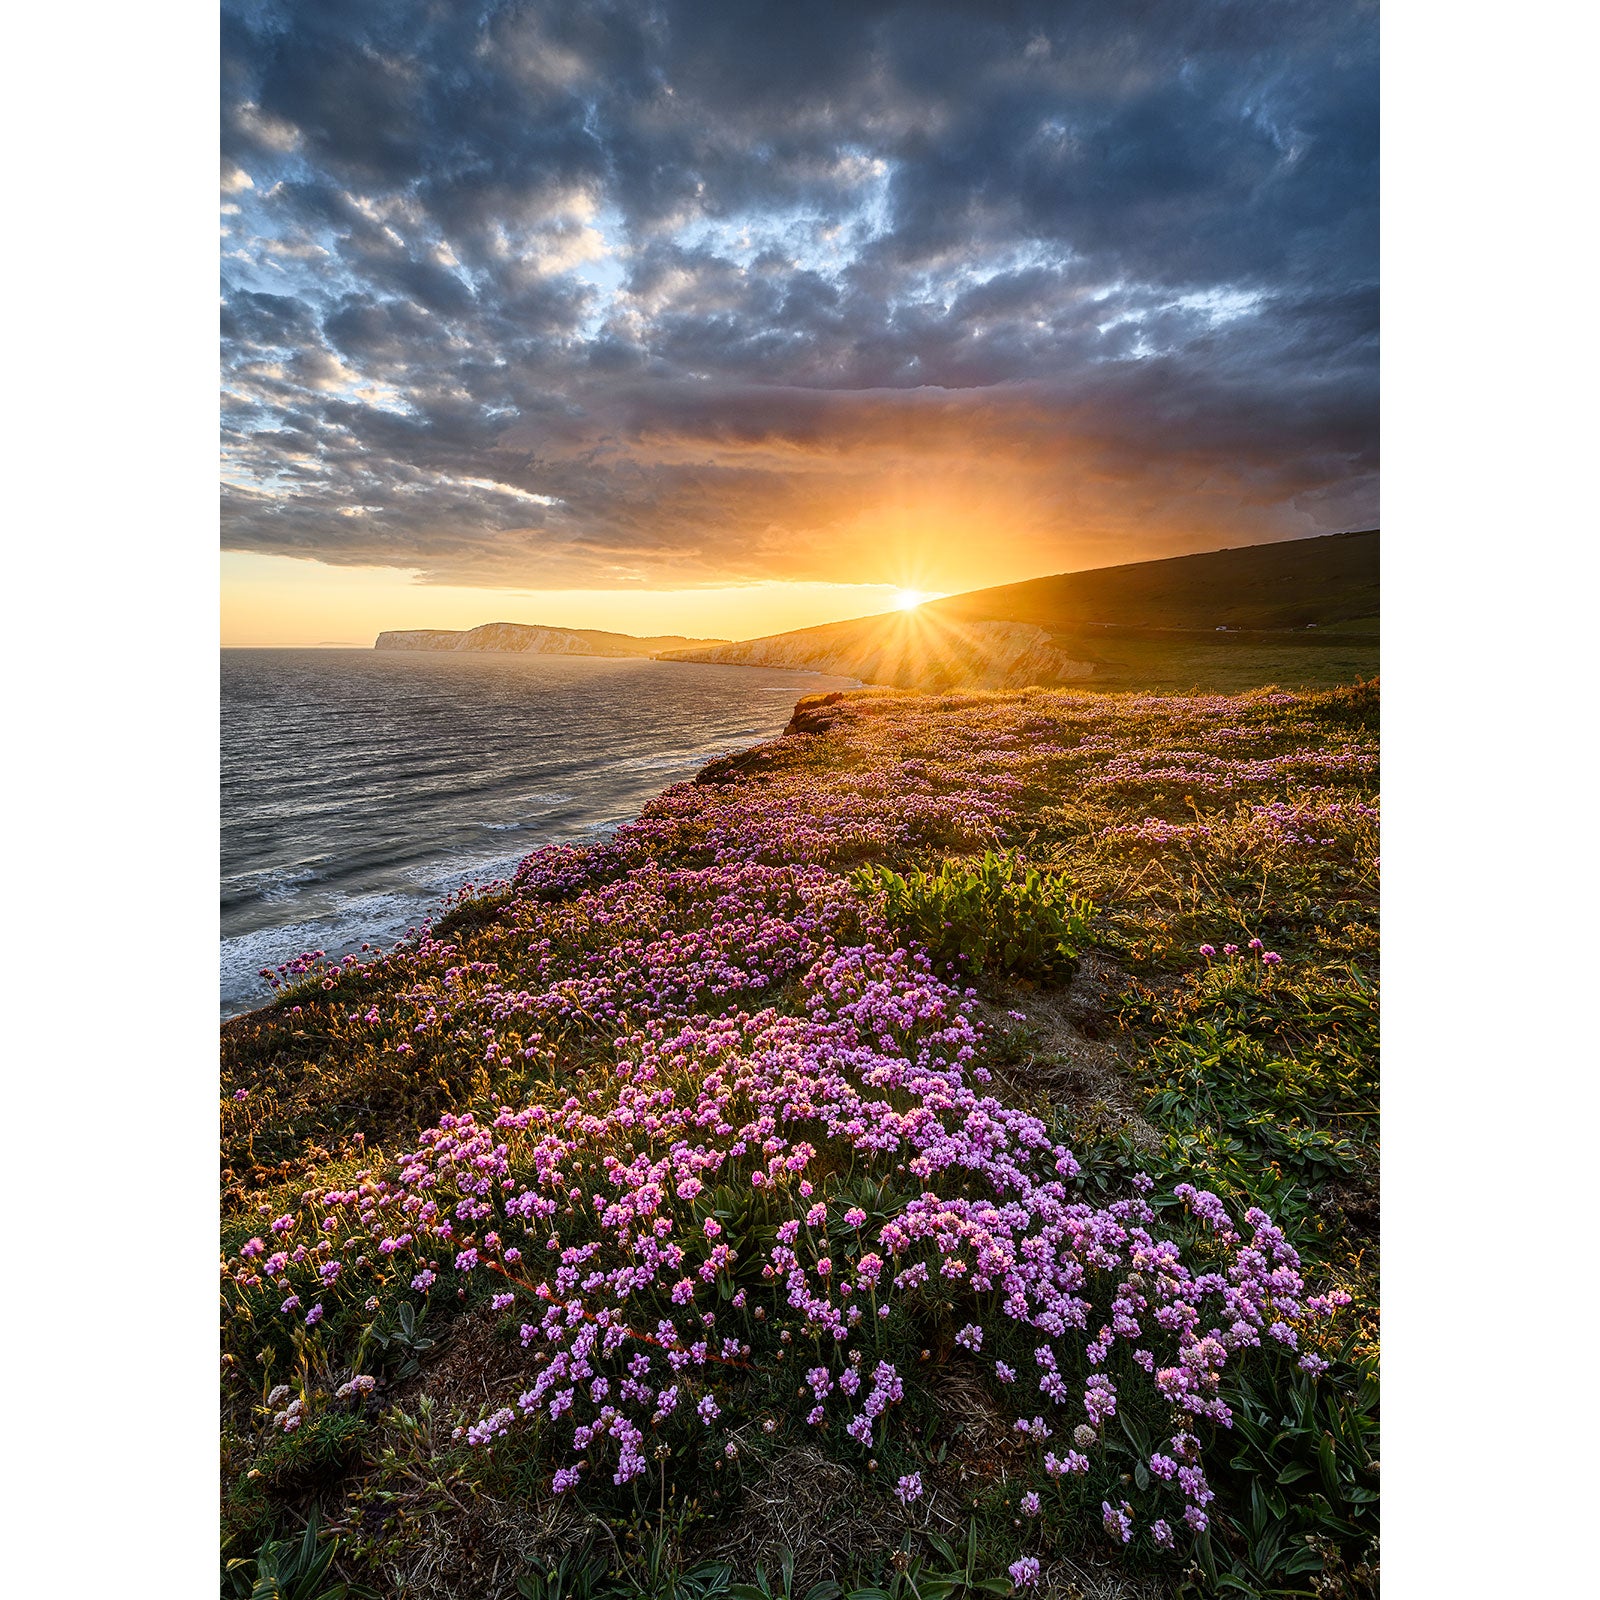 Sunset over a coastal landscape on the Isle of Wight with Pink Thrift flowering shrubs in the foreground by Available Light Photography.